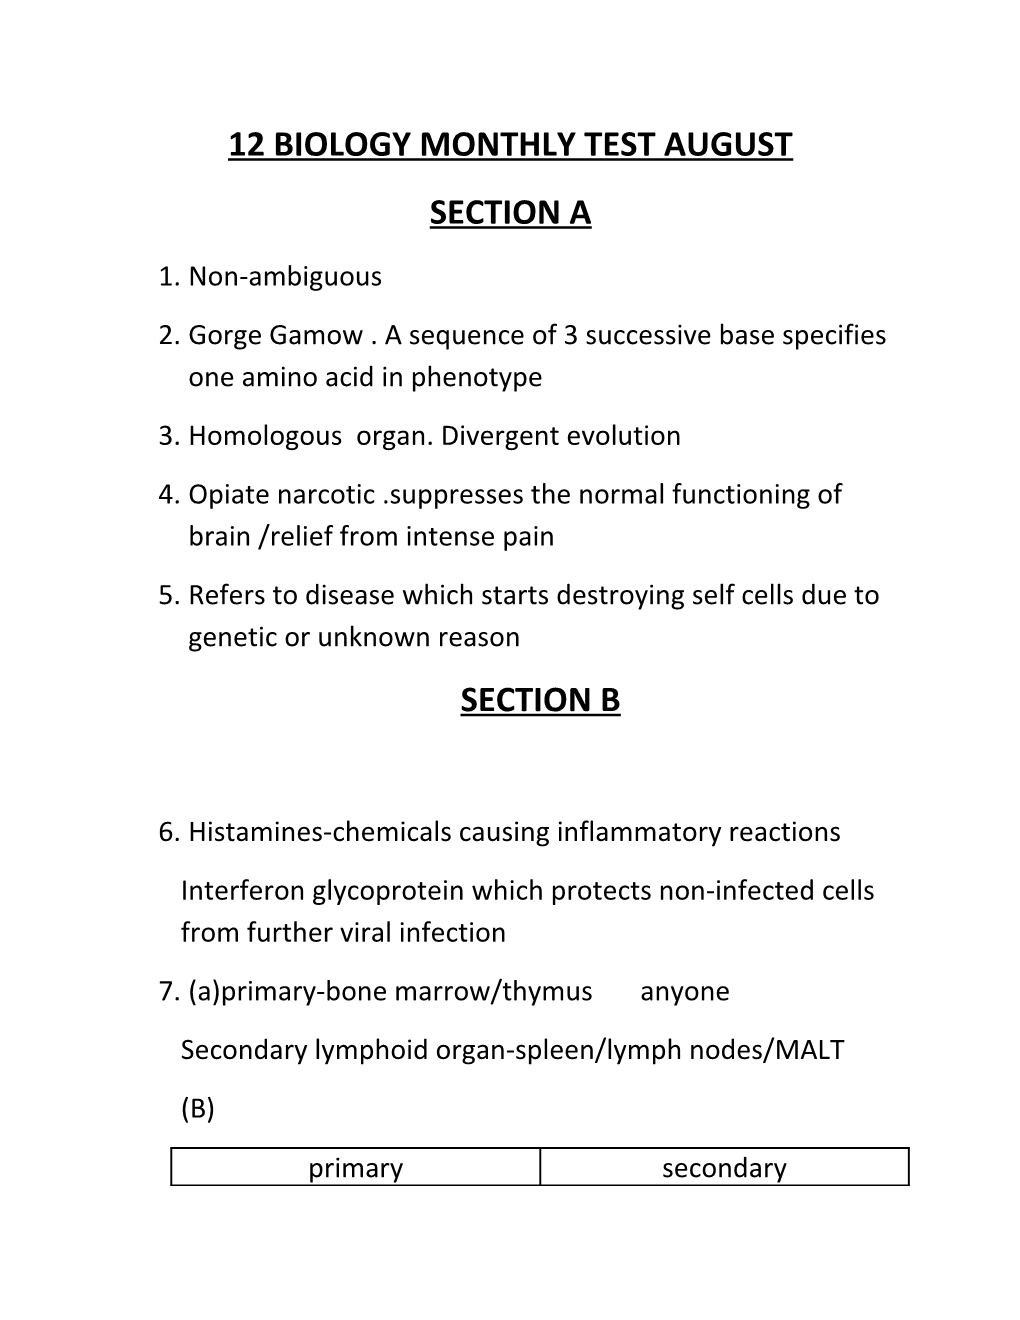 12 Biology Monthly Test August